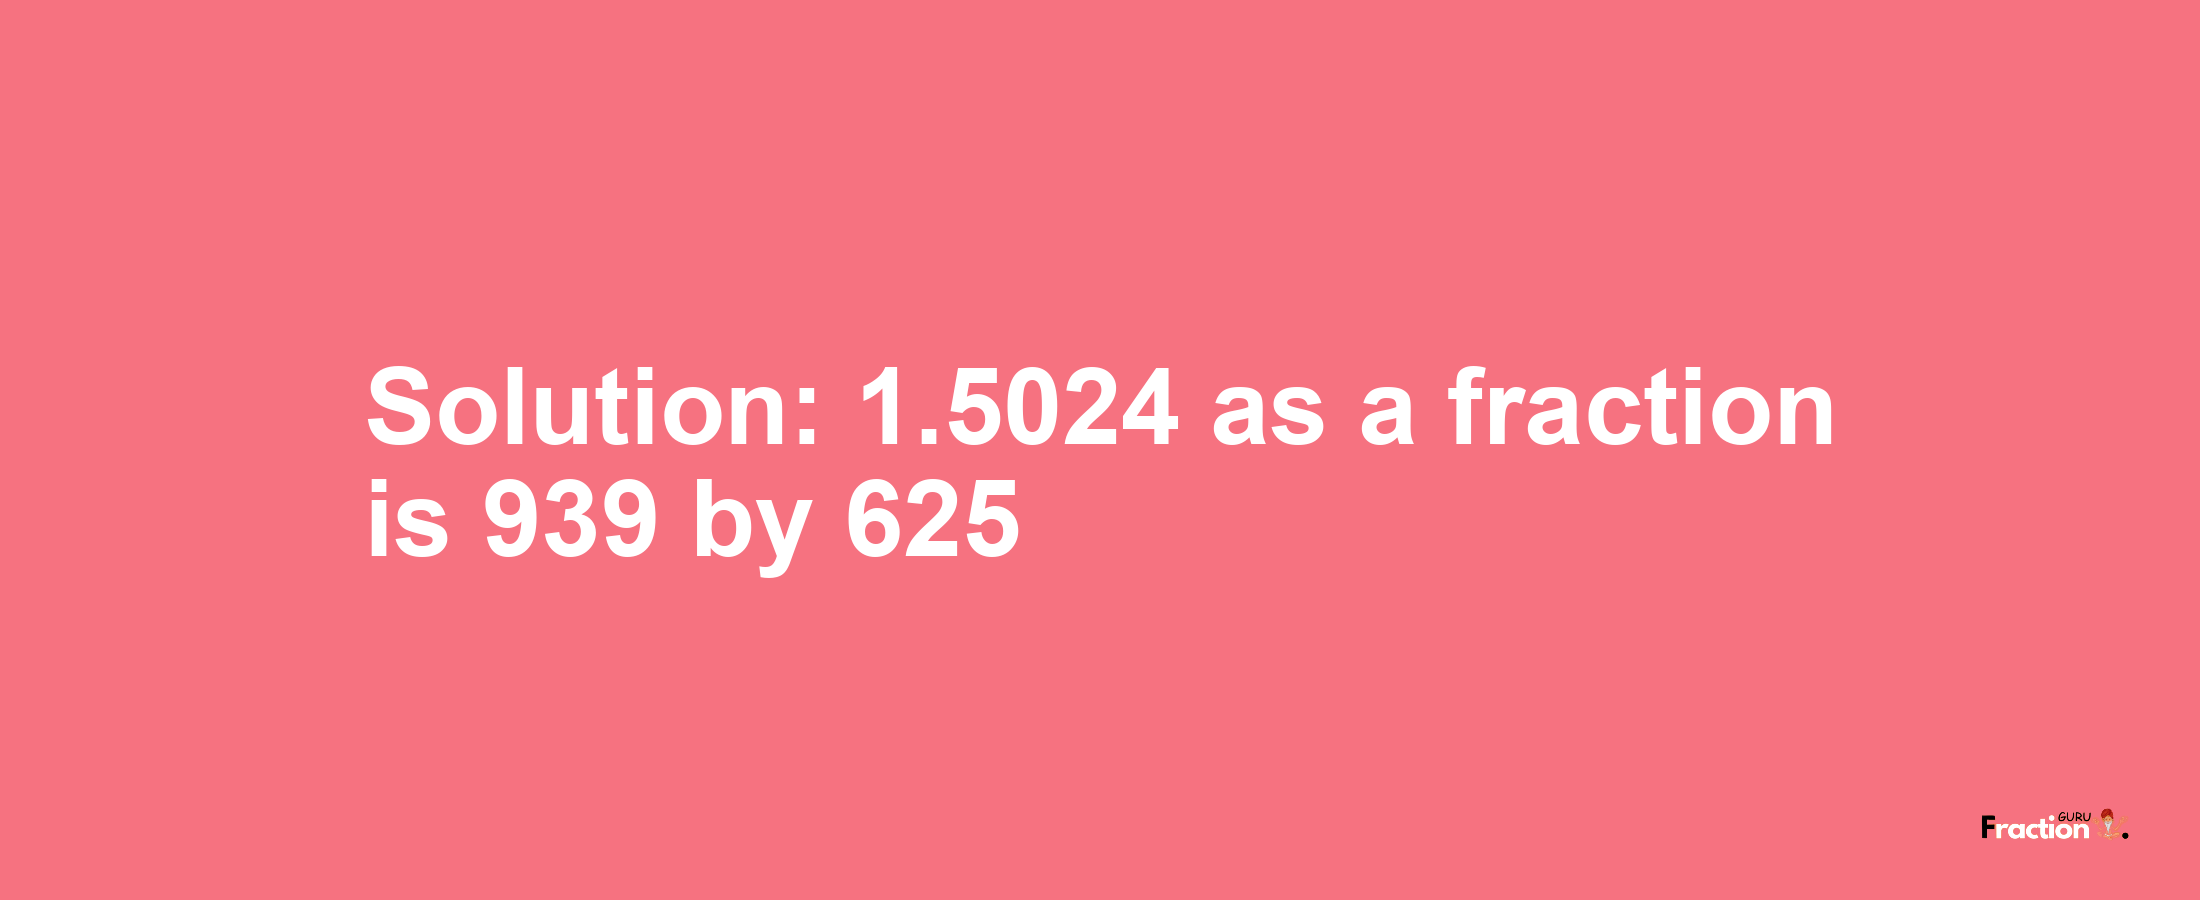 Solution:1.5024 as a fraction is 939/625